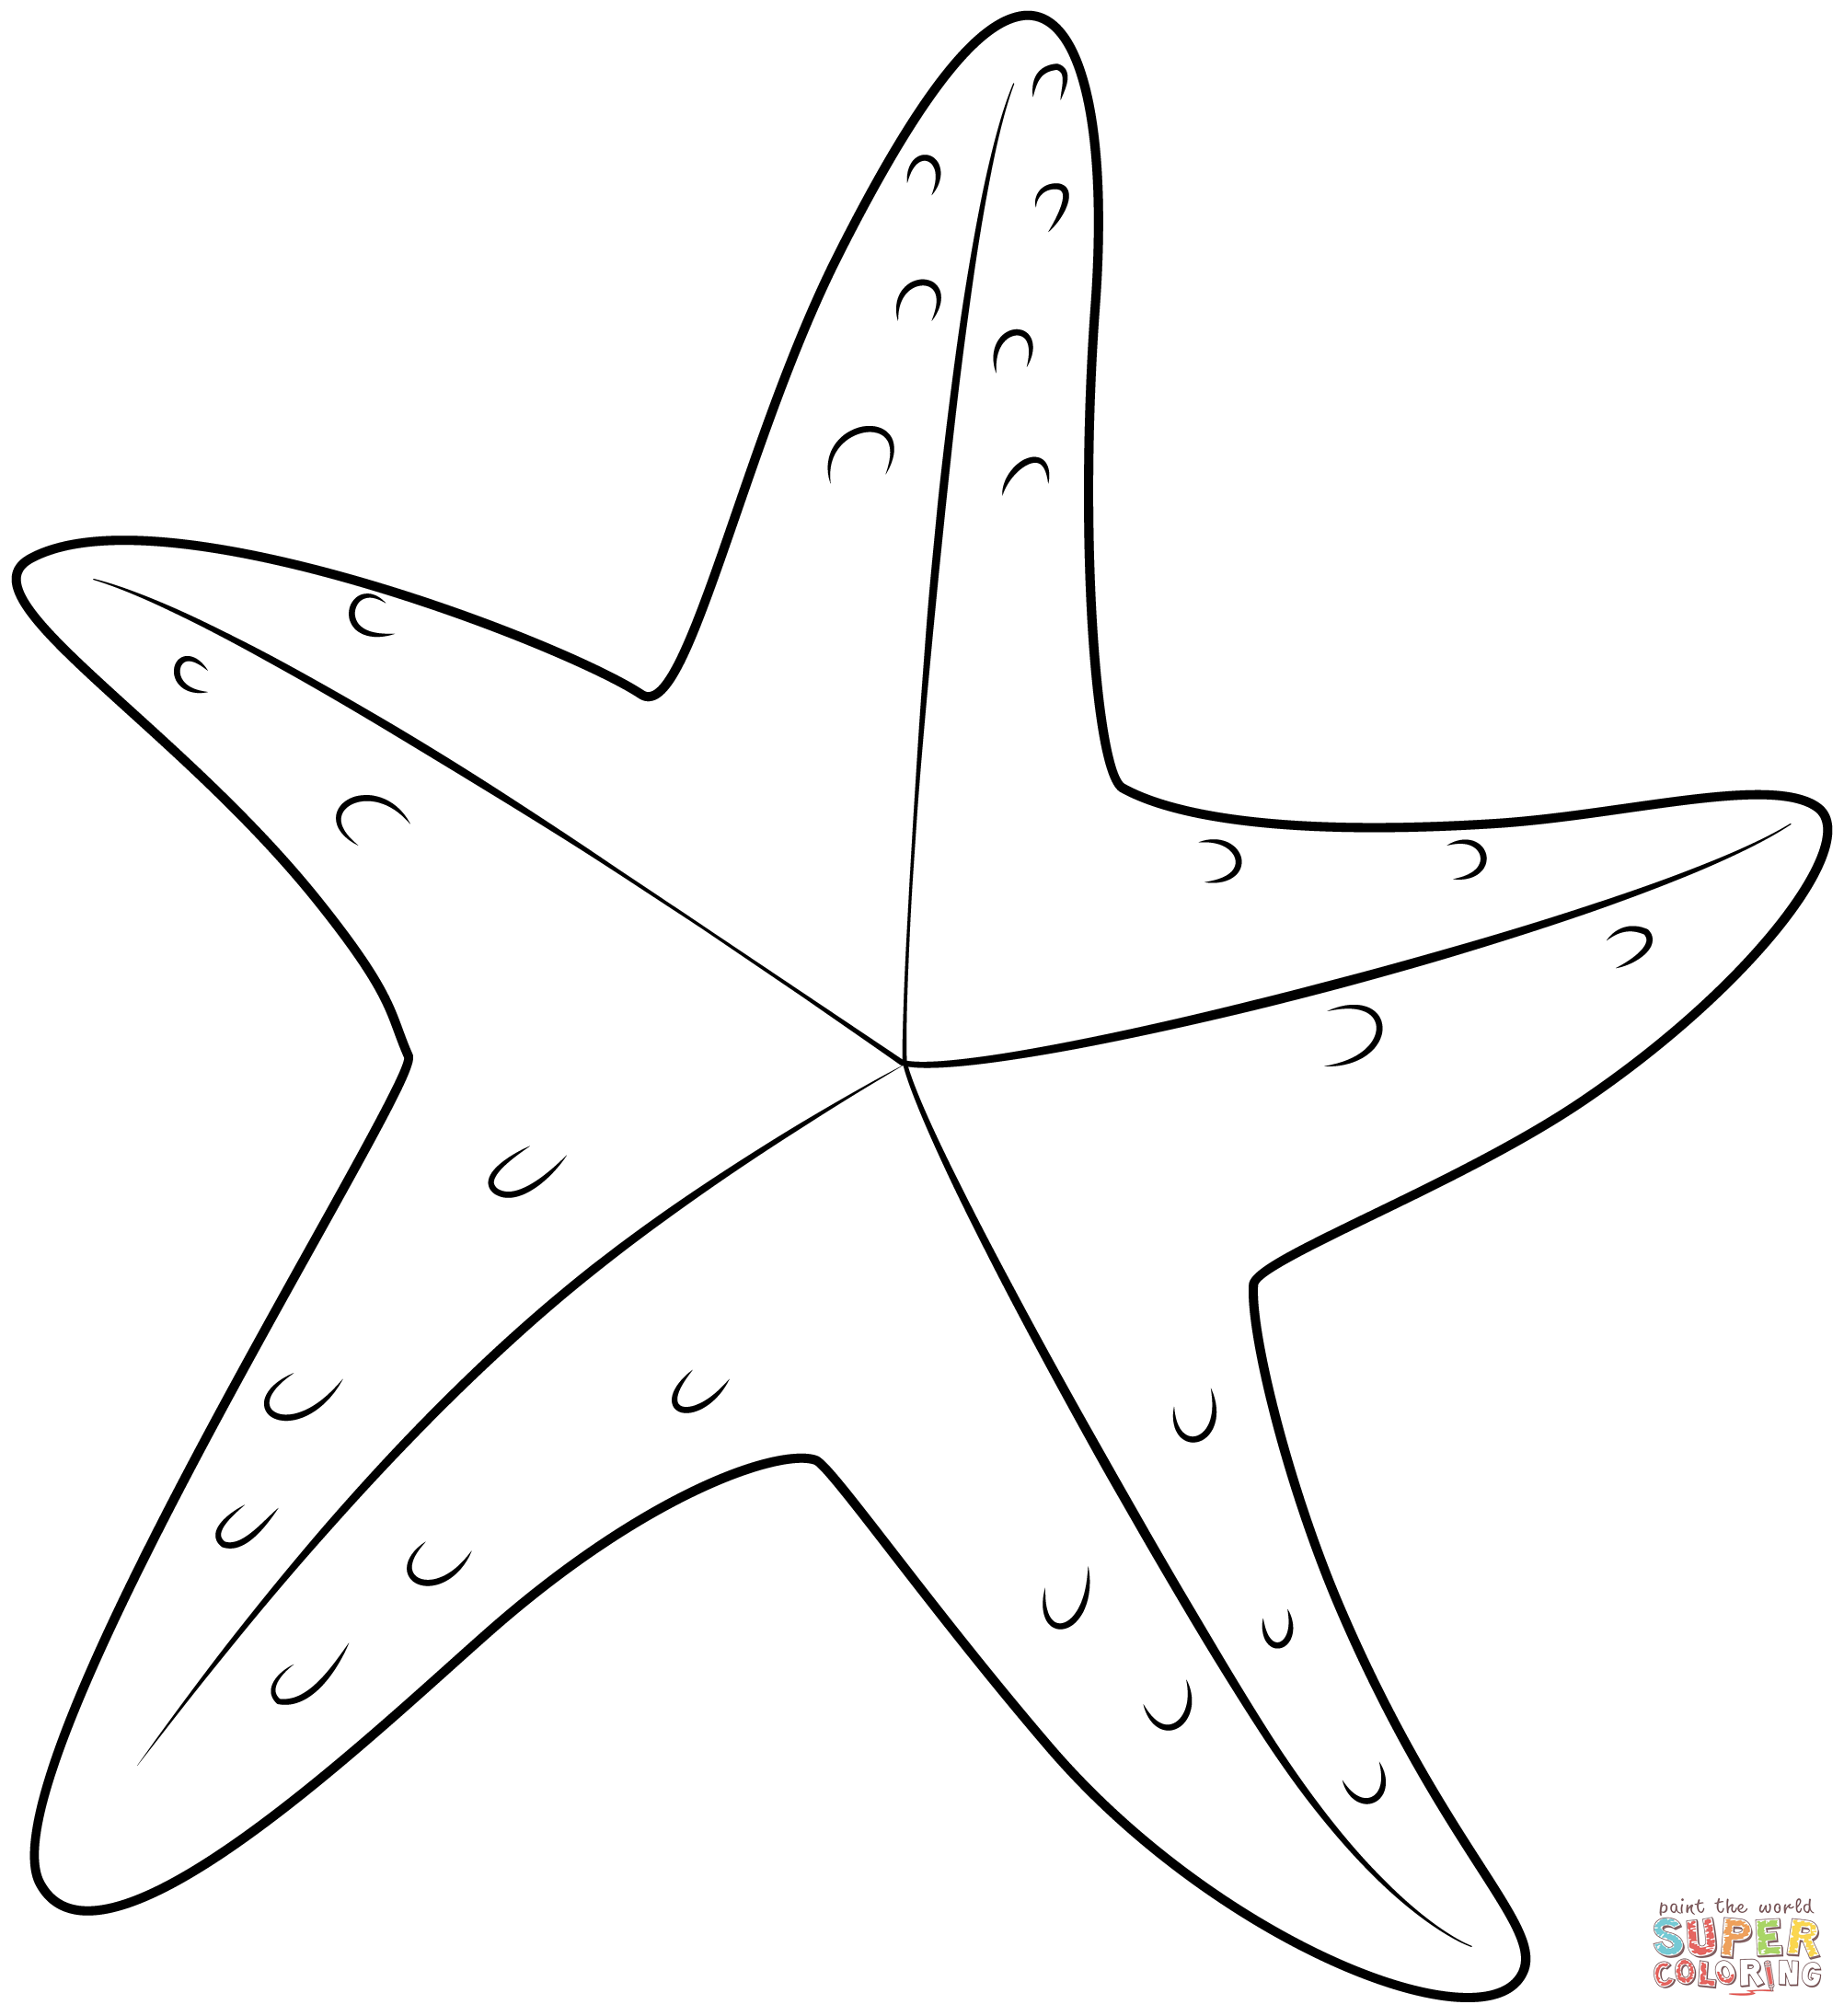 Starfish coloring page free printable coloring pages